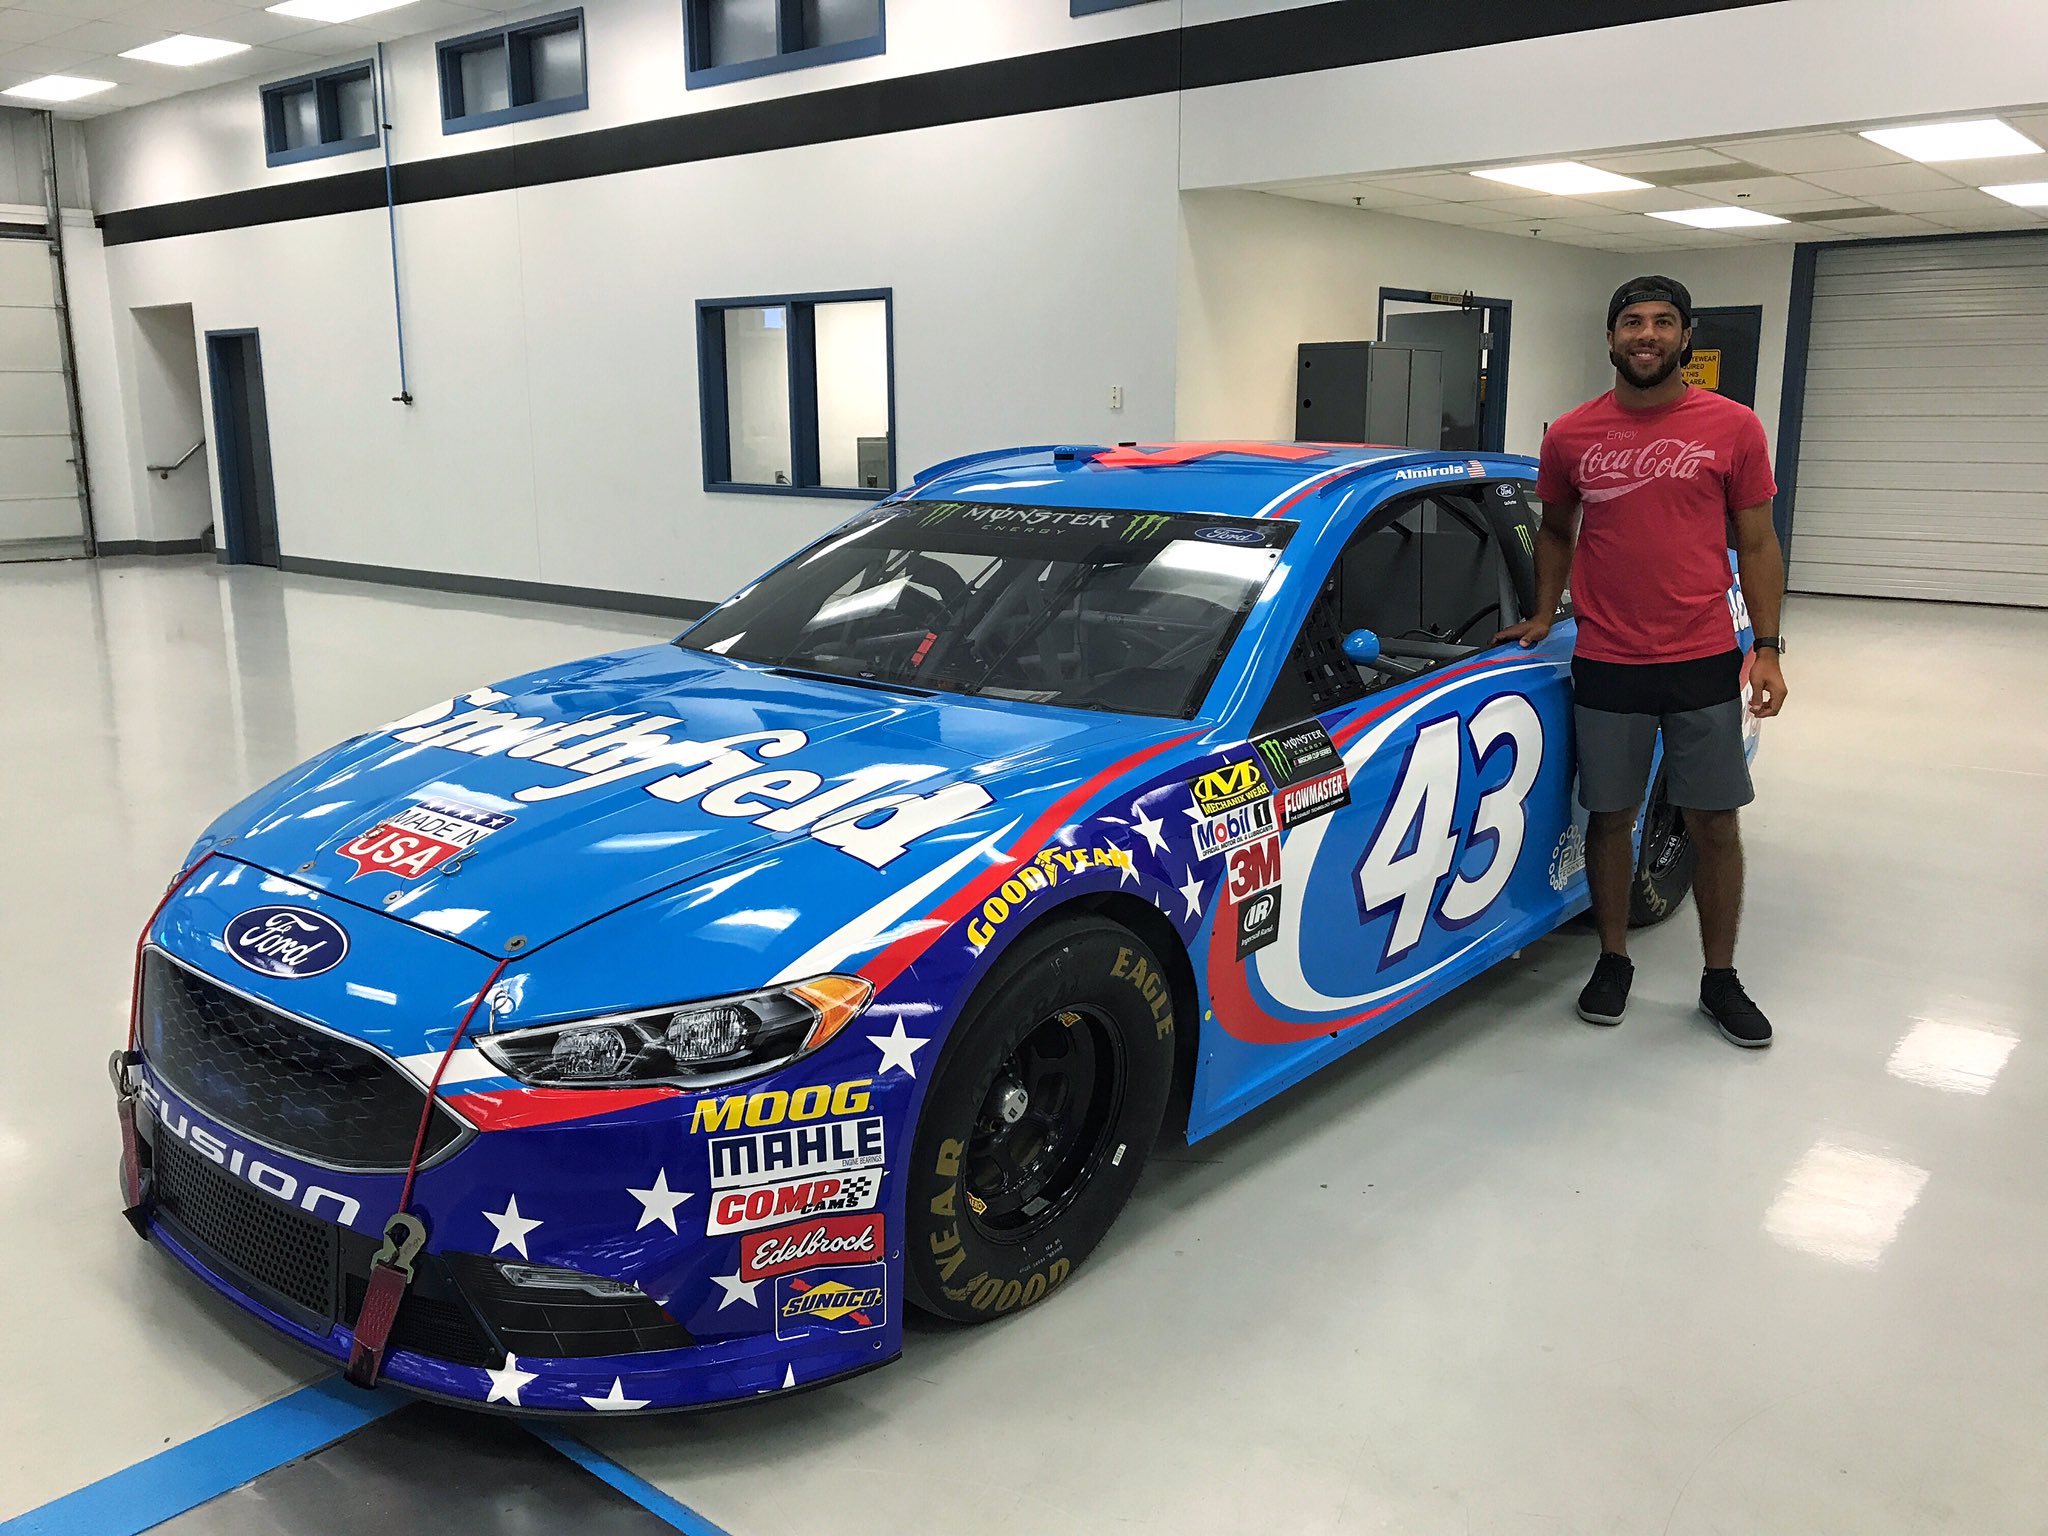 It's sure been a whirlwind week for Bubba Wallace.